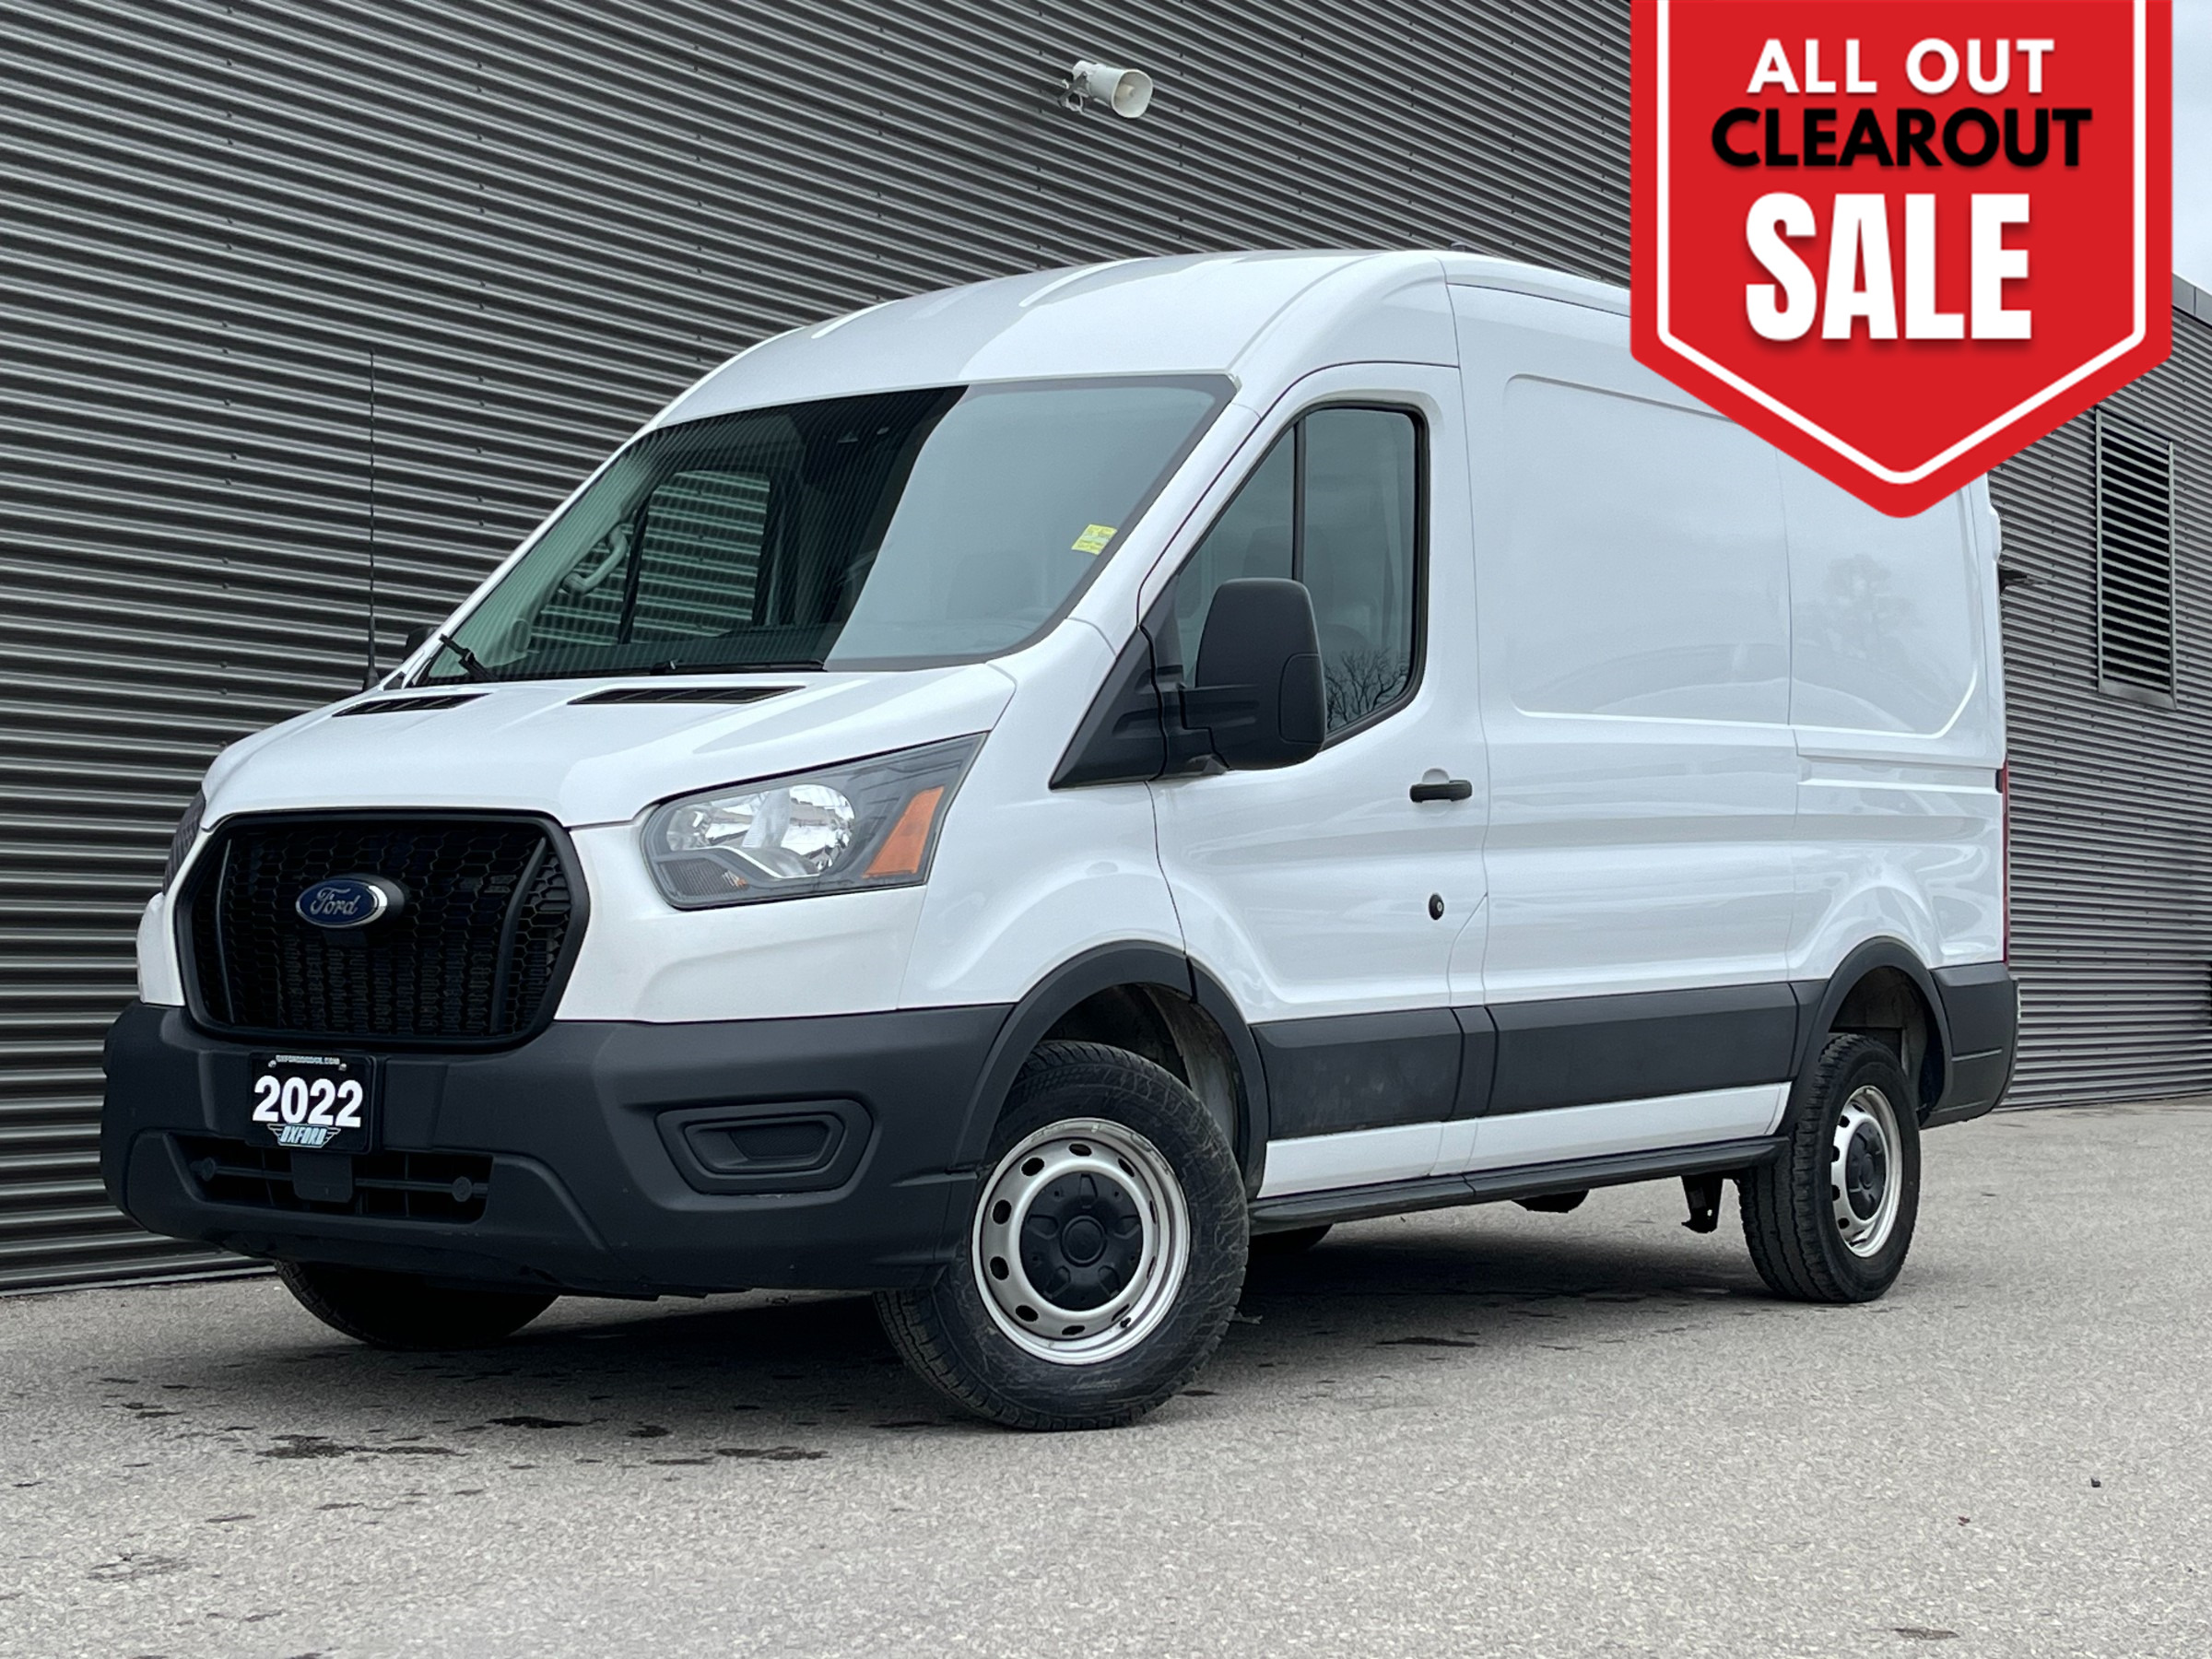 2022 Ford Transit Cargo Van Former Daily Rental, Clean Car Fax, Rare Find